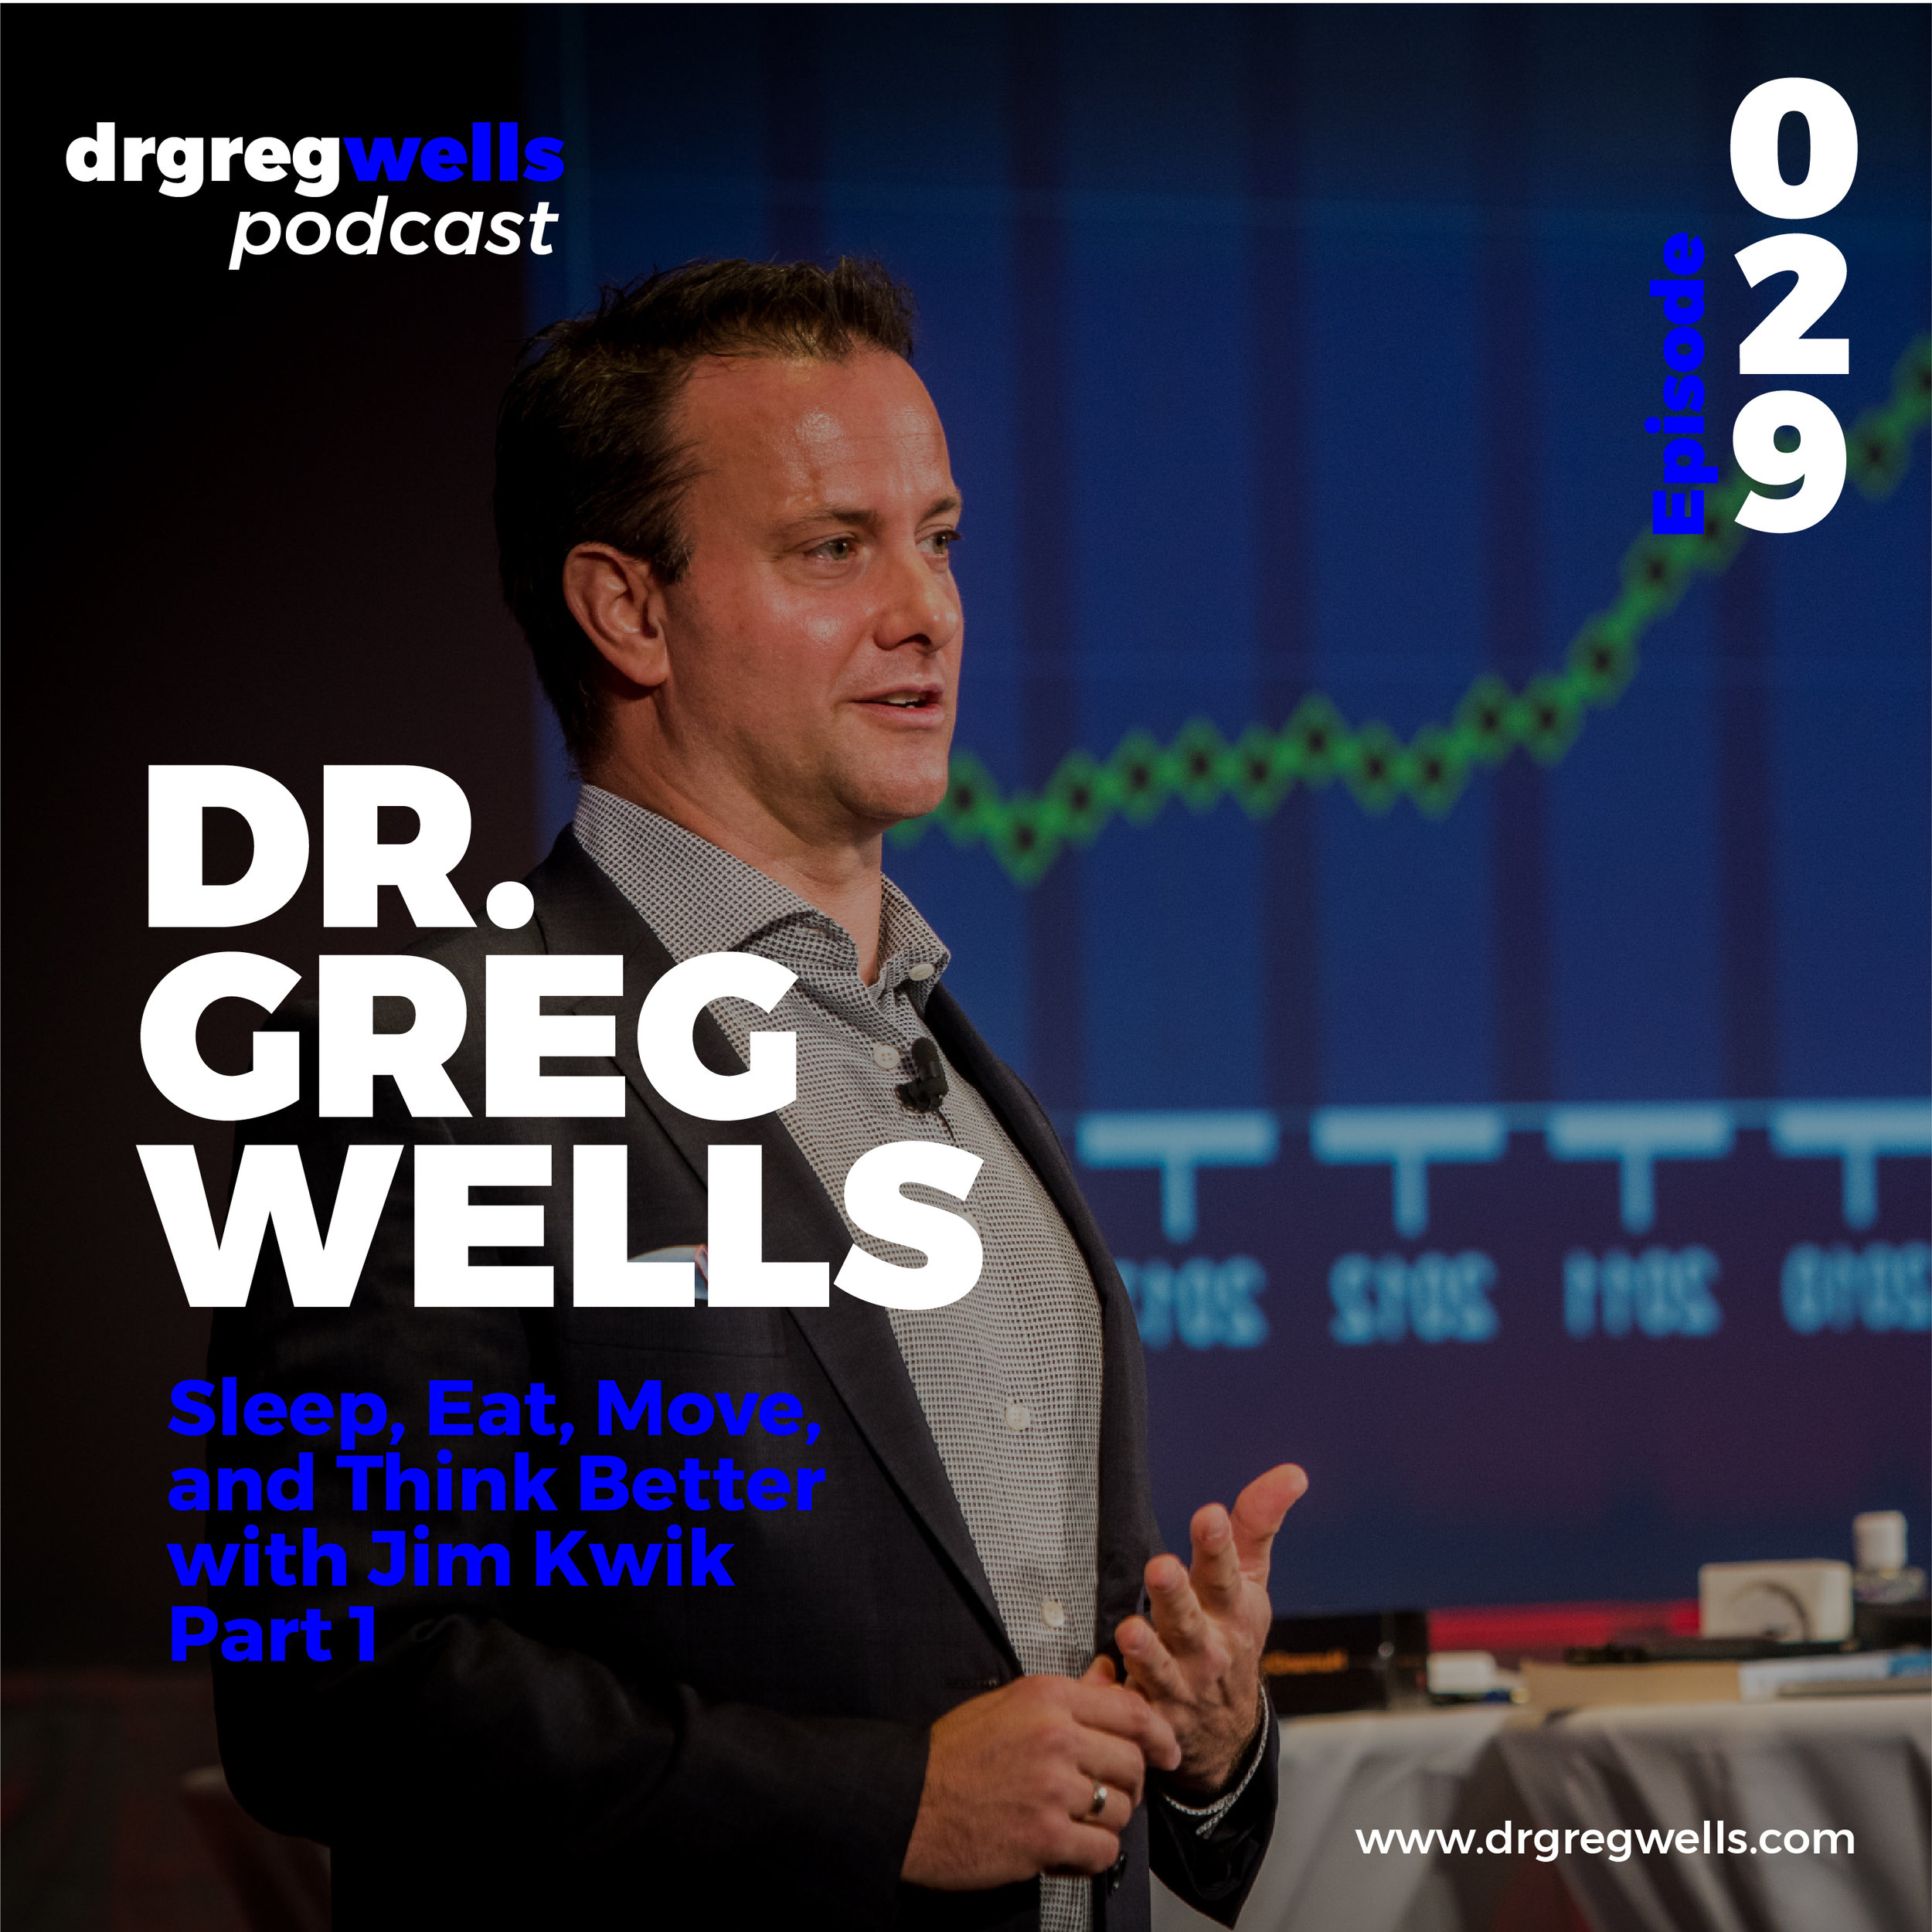 Dr Greg Wells Podcast Guest EP 1 - 32-29.jpg